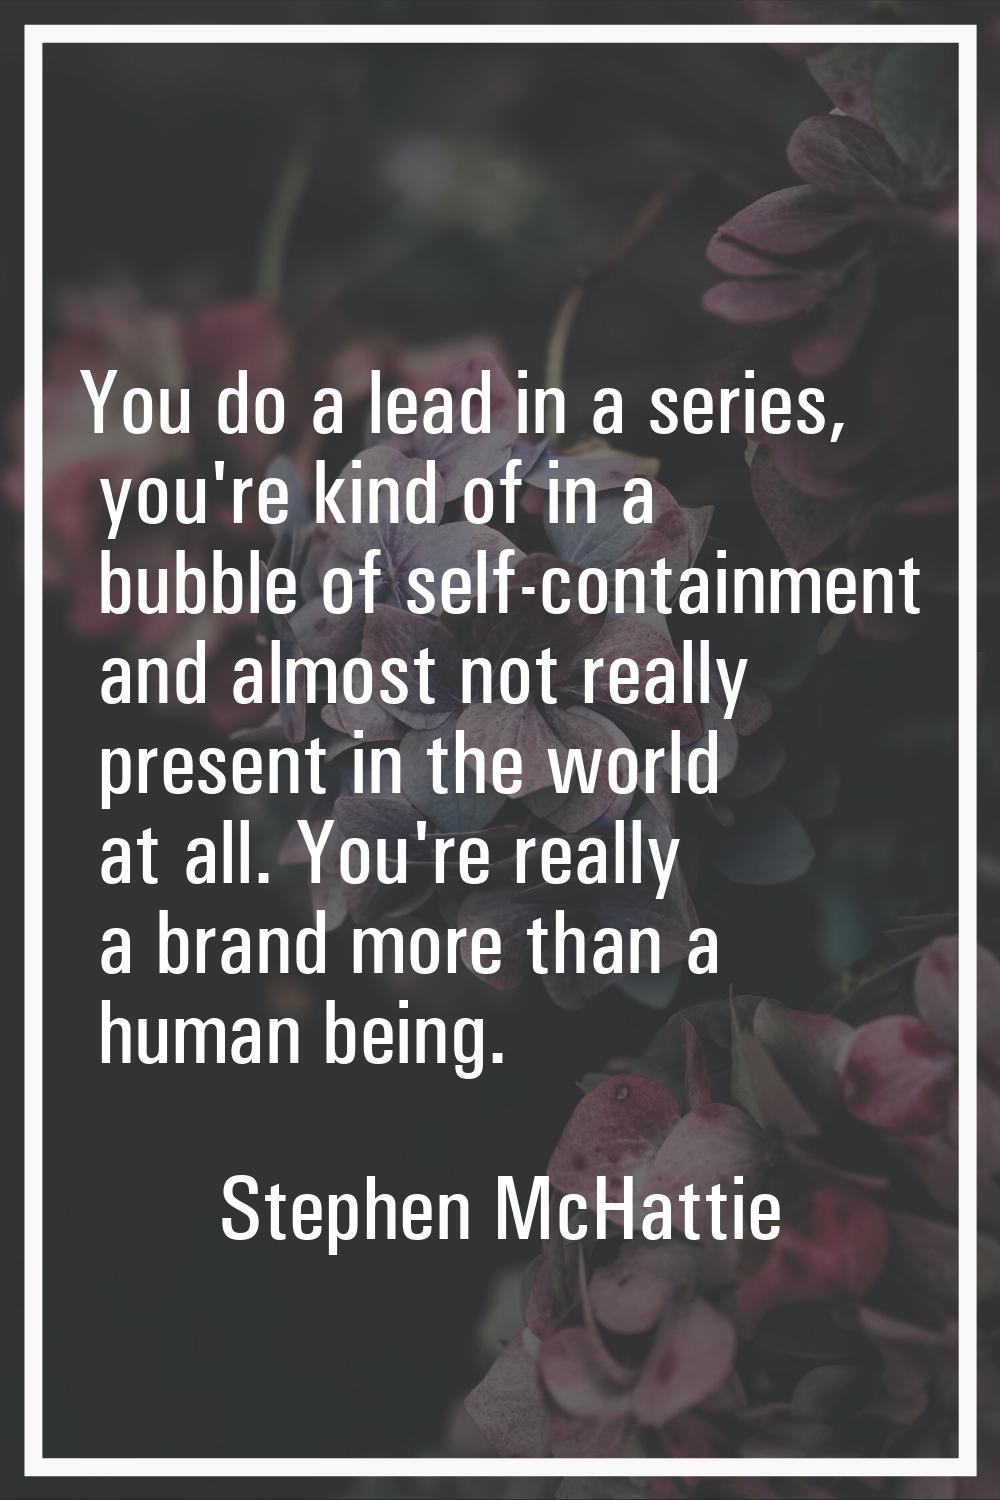 You do a lead in a series, you're kind of in a bubble of self-containment and almost not really pre